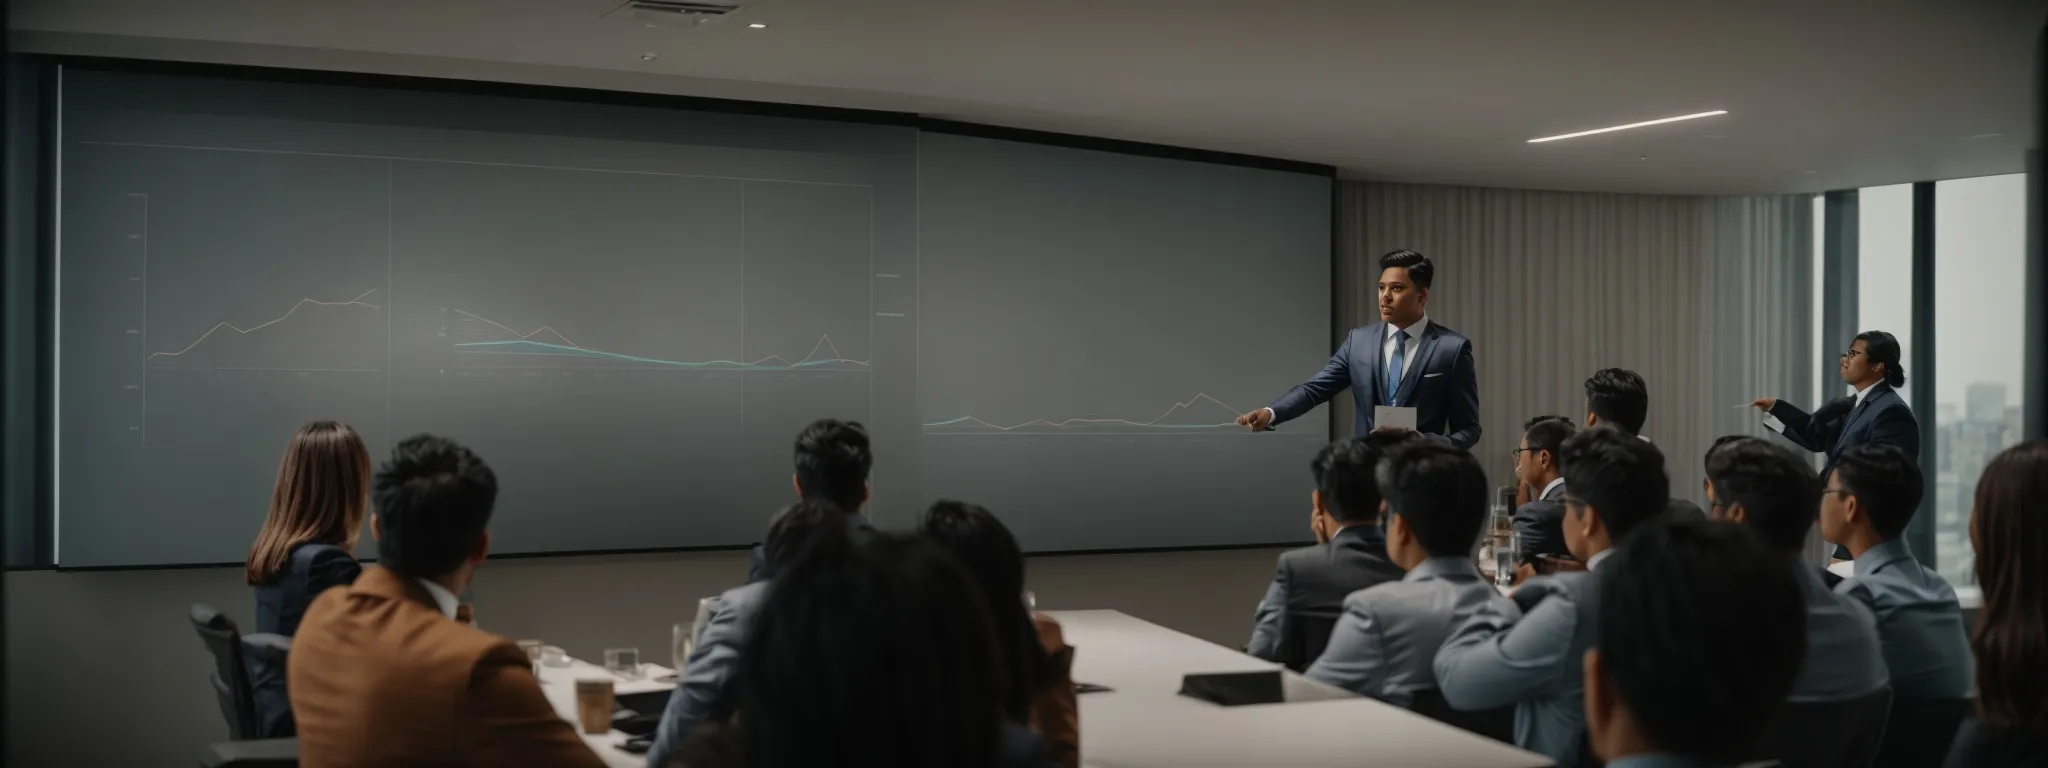 a confident individual presents a graph highlighting growth trends to an attentive group in a modern conference room.